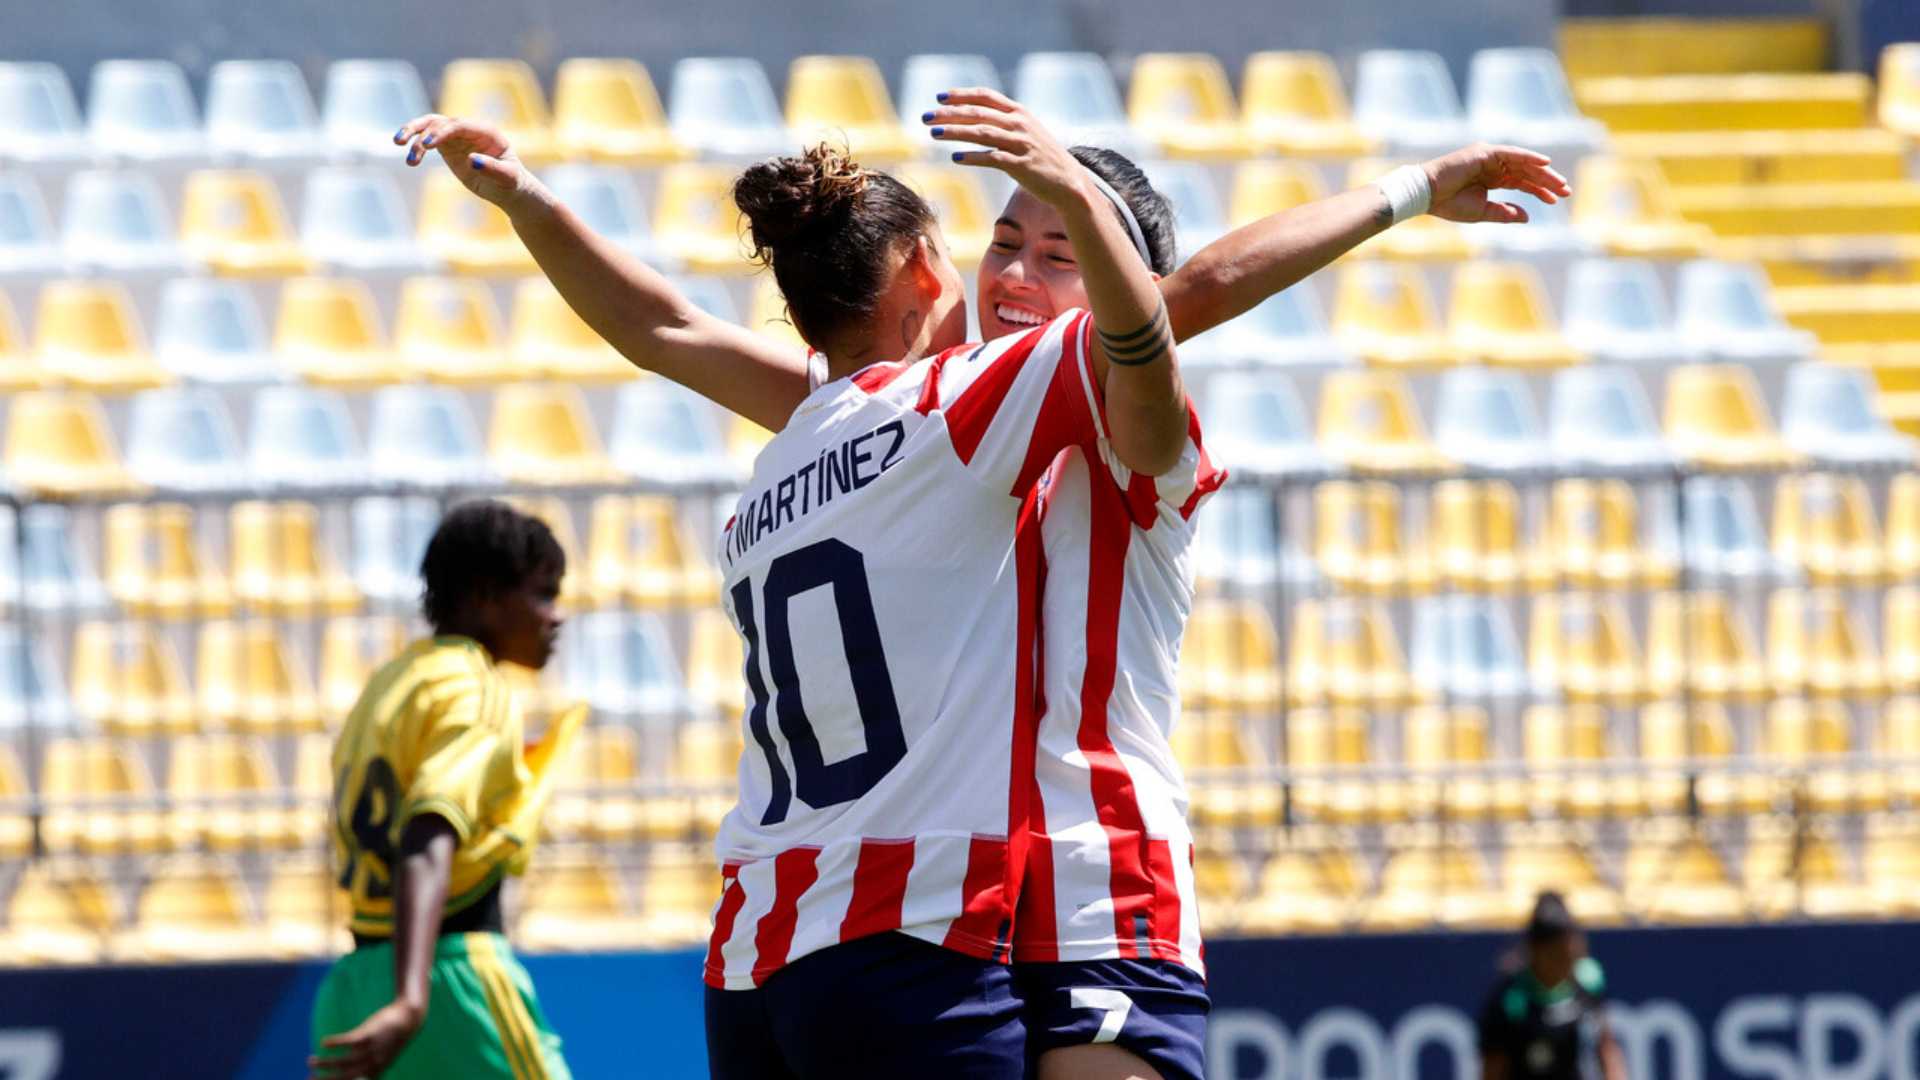 Paraguay crushes Jamaica and gets fired up in Pan American female soccer